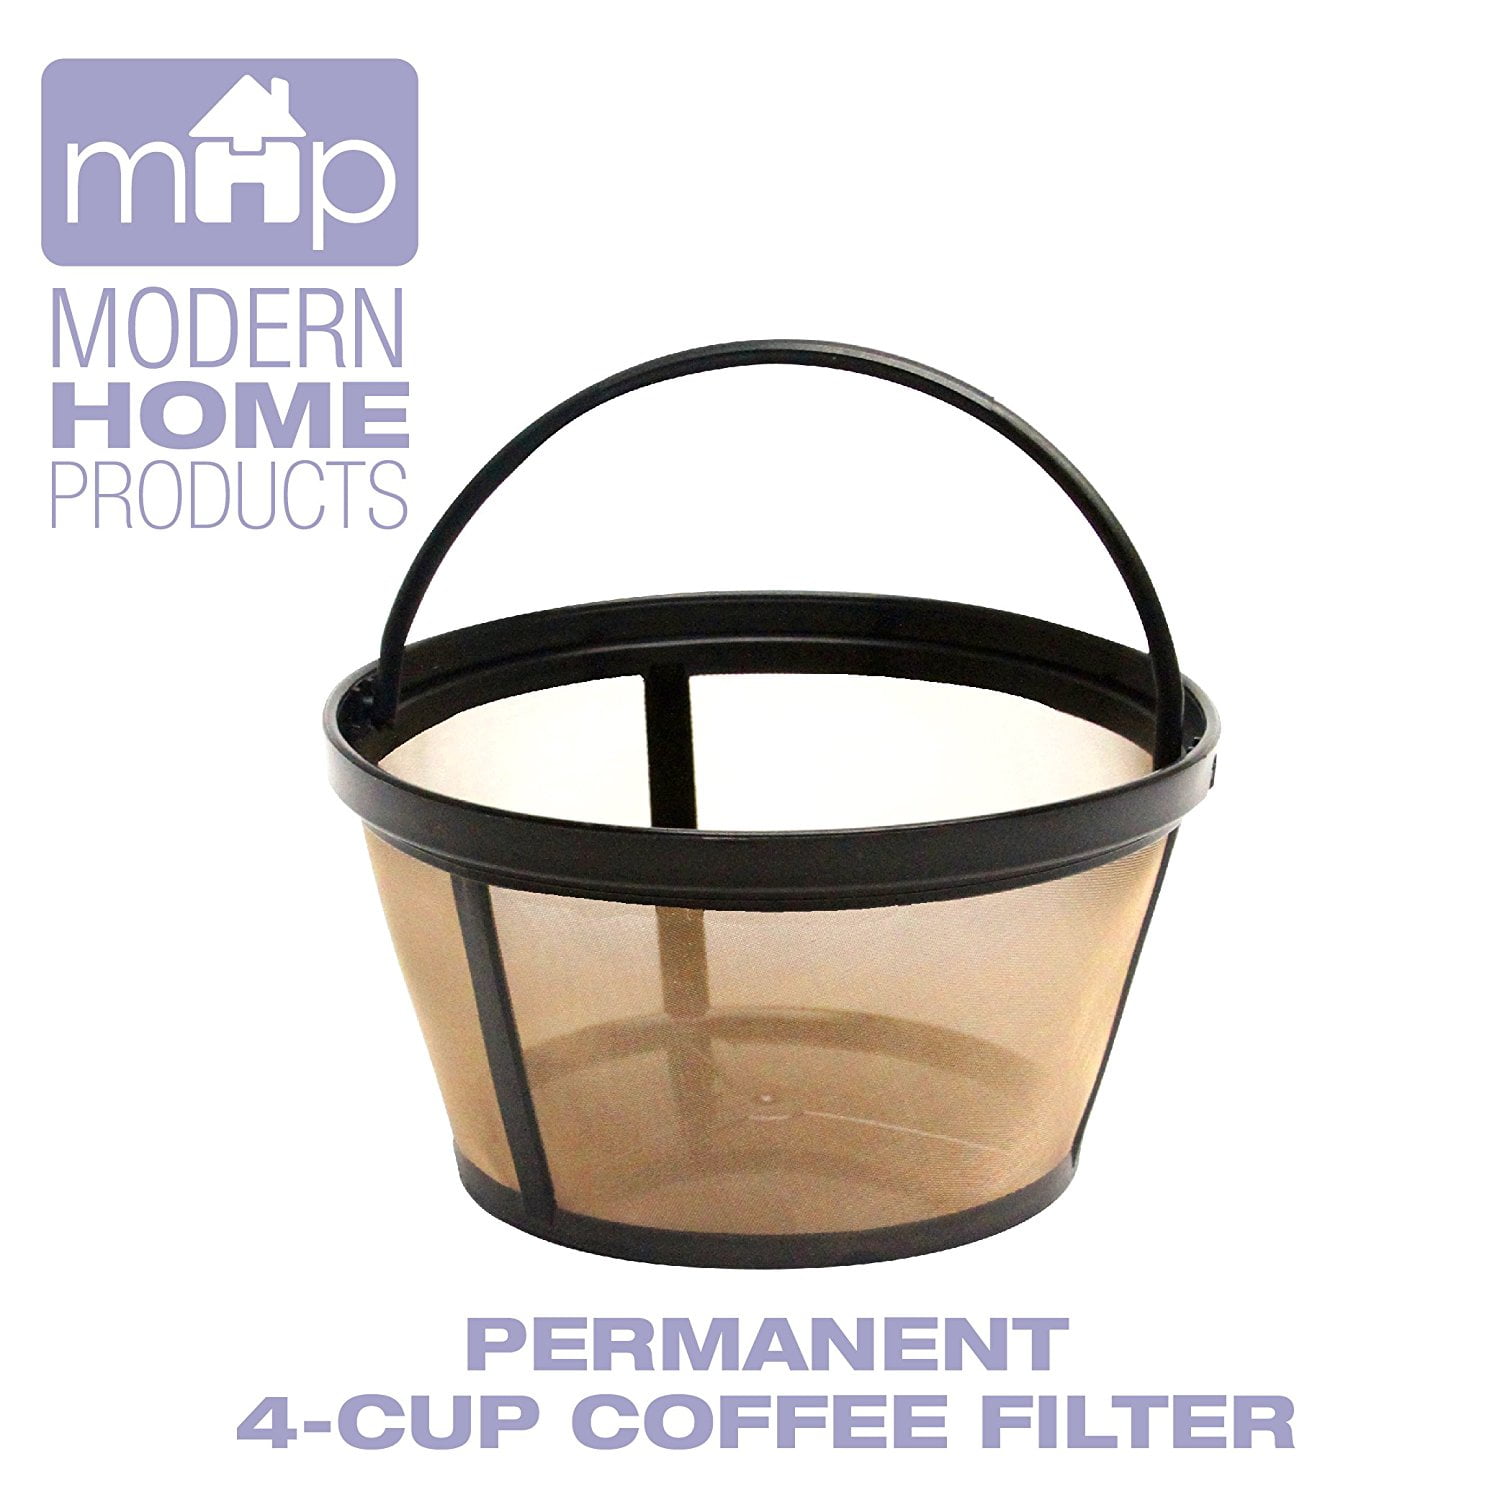 Reusable Gold Tone Permanent #4  Shape Coffee Filter Mesh Basket Filter NEW 